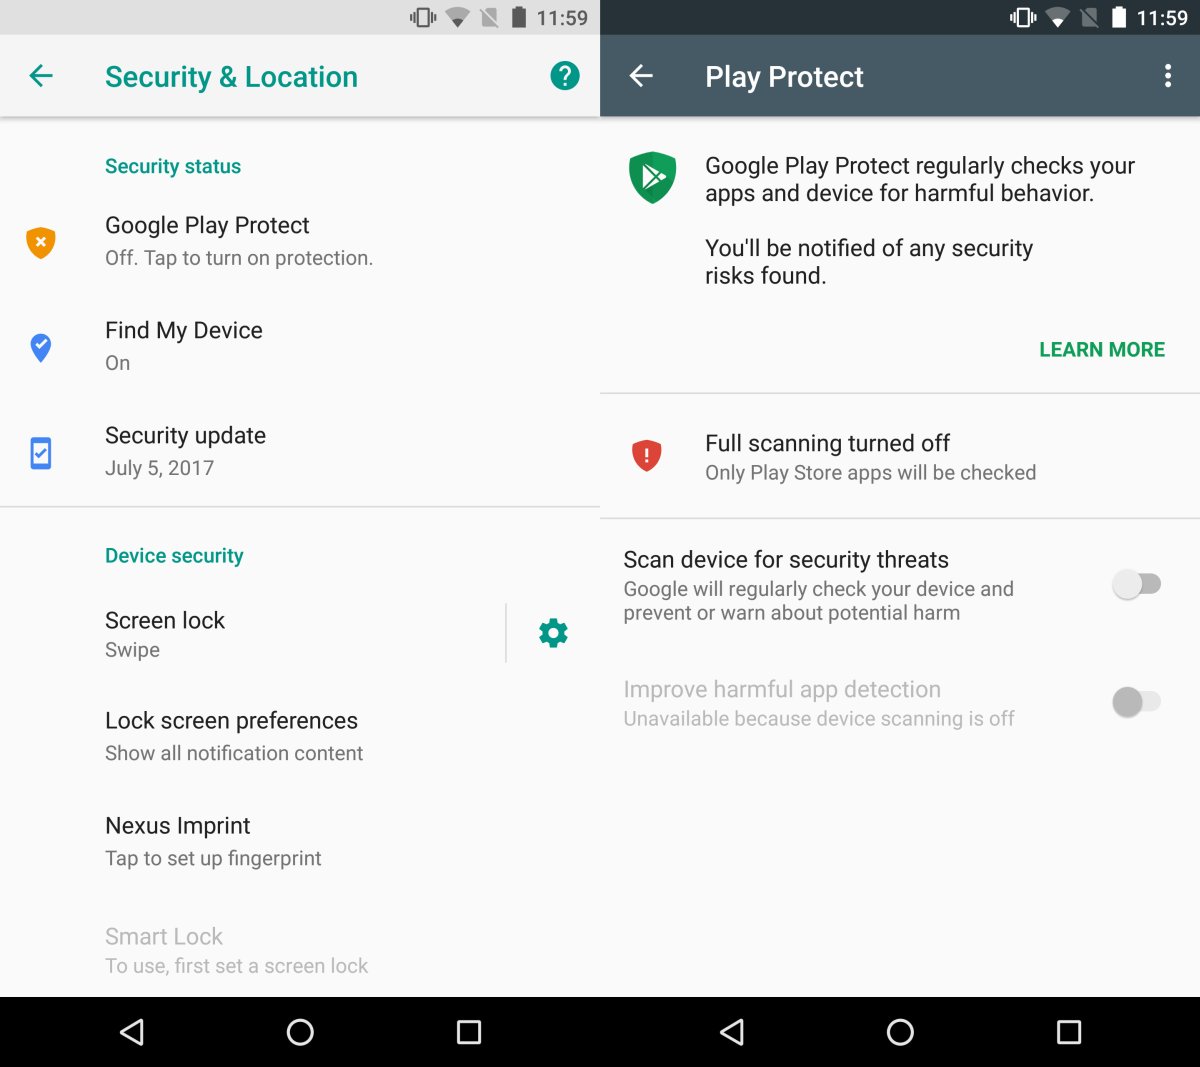 How to enable Google Play Protect on Android